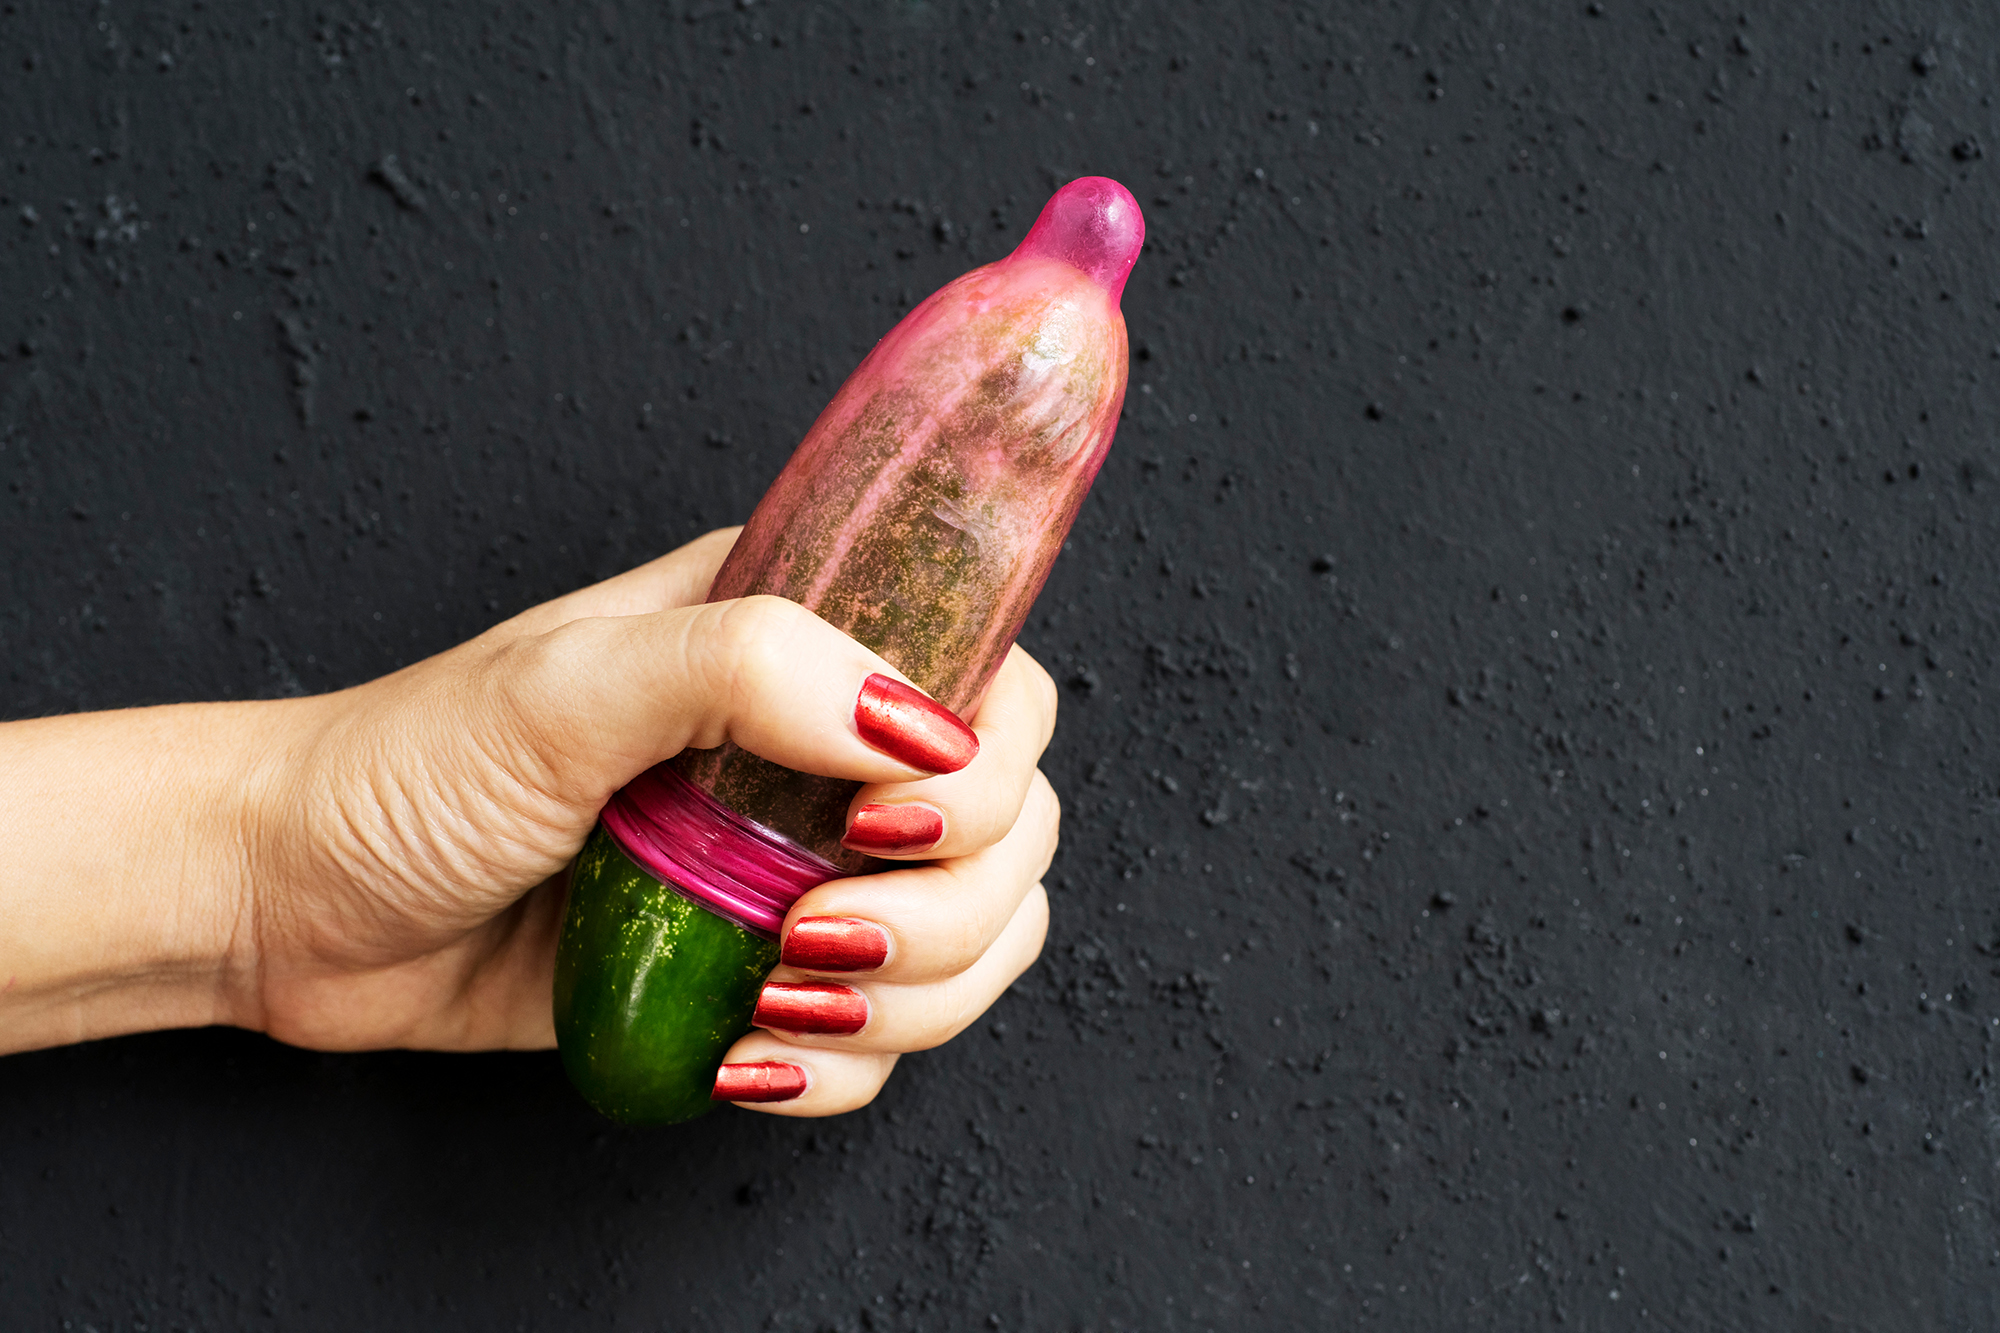 Best of Household objects as dildos